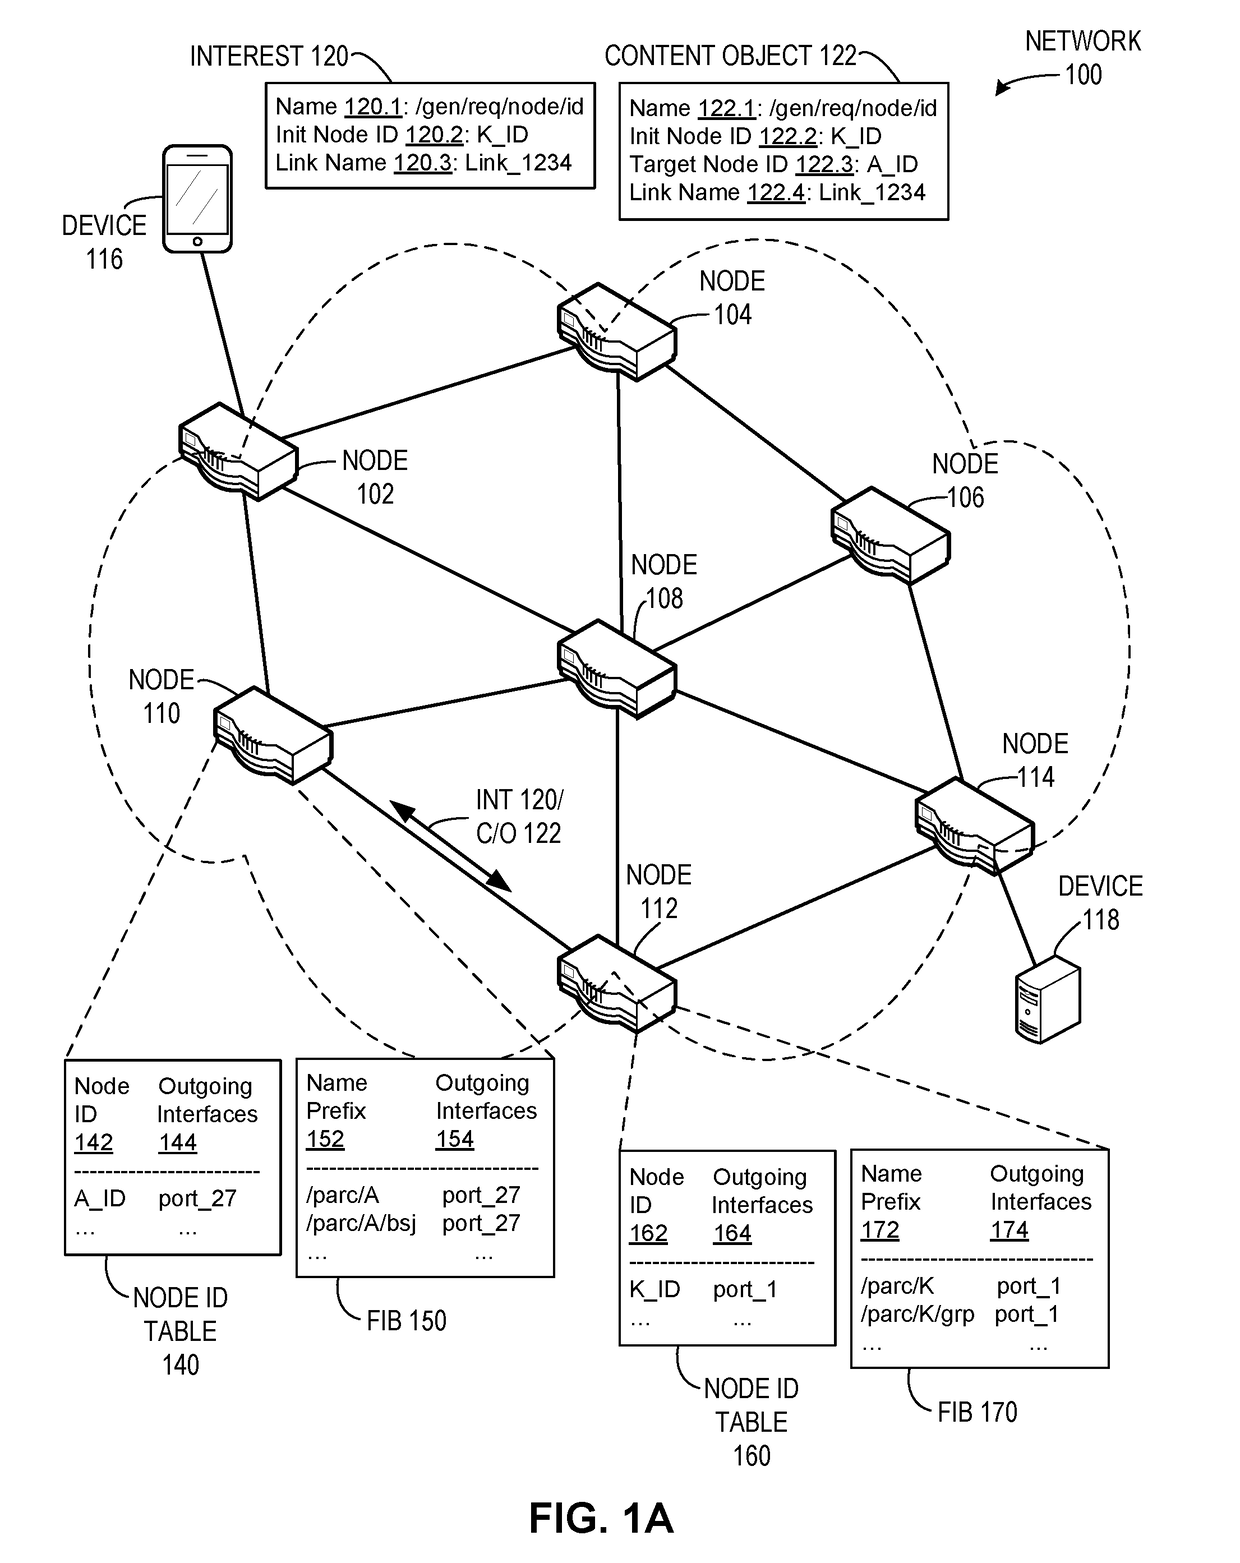 System and method for forwarder connection information in a content centric network